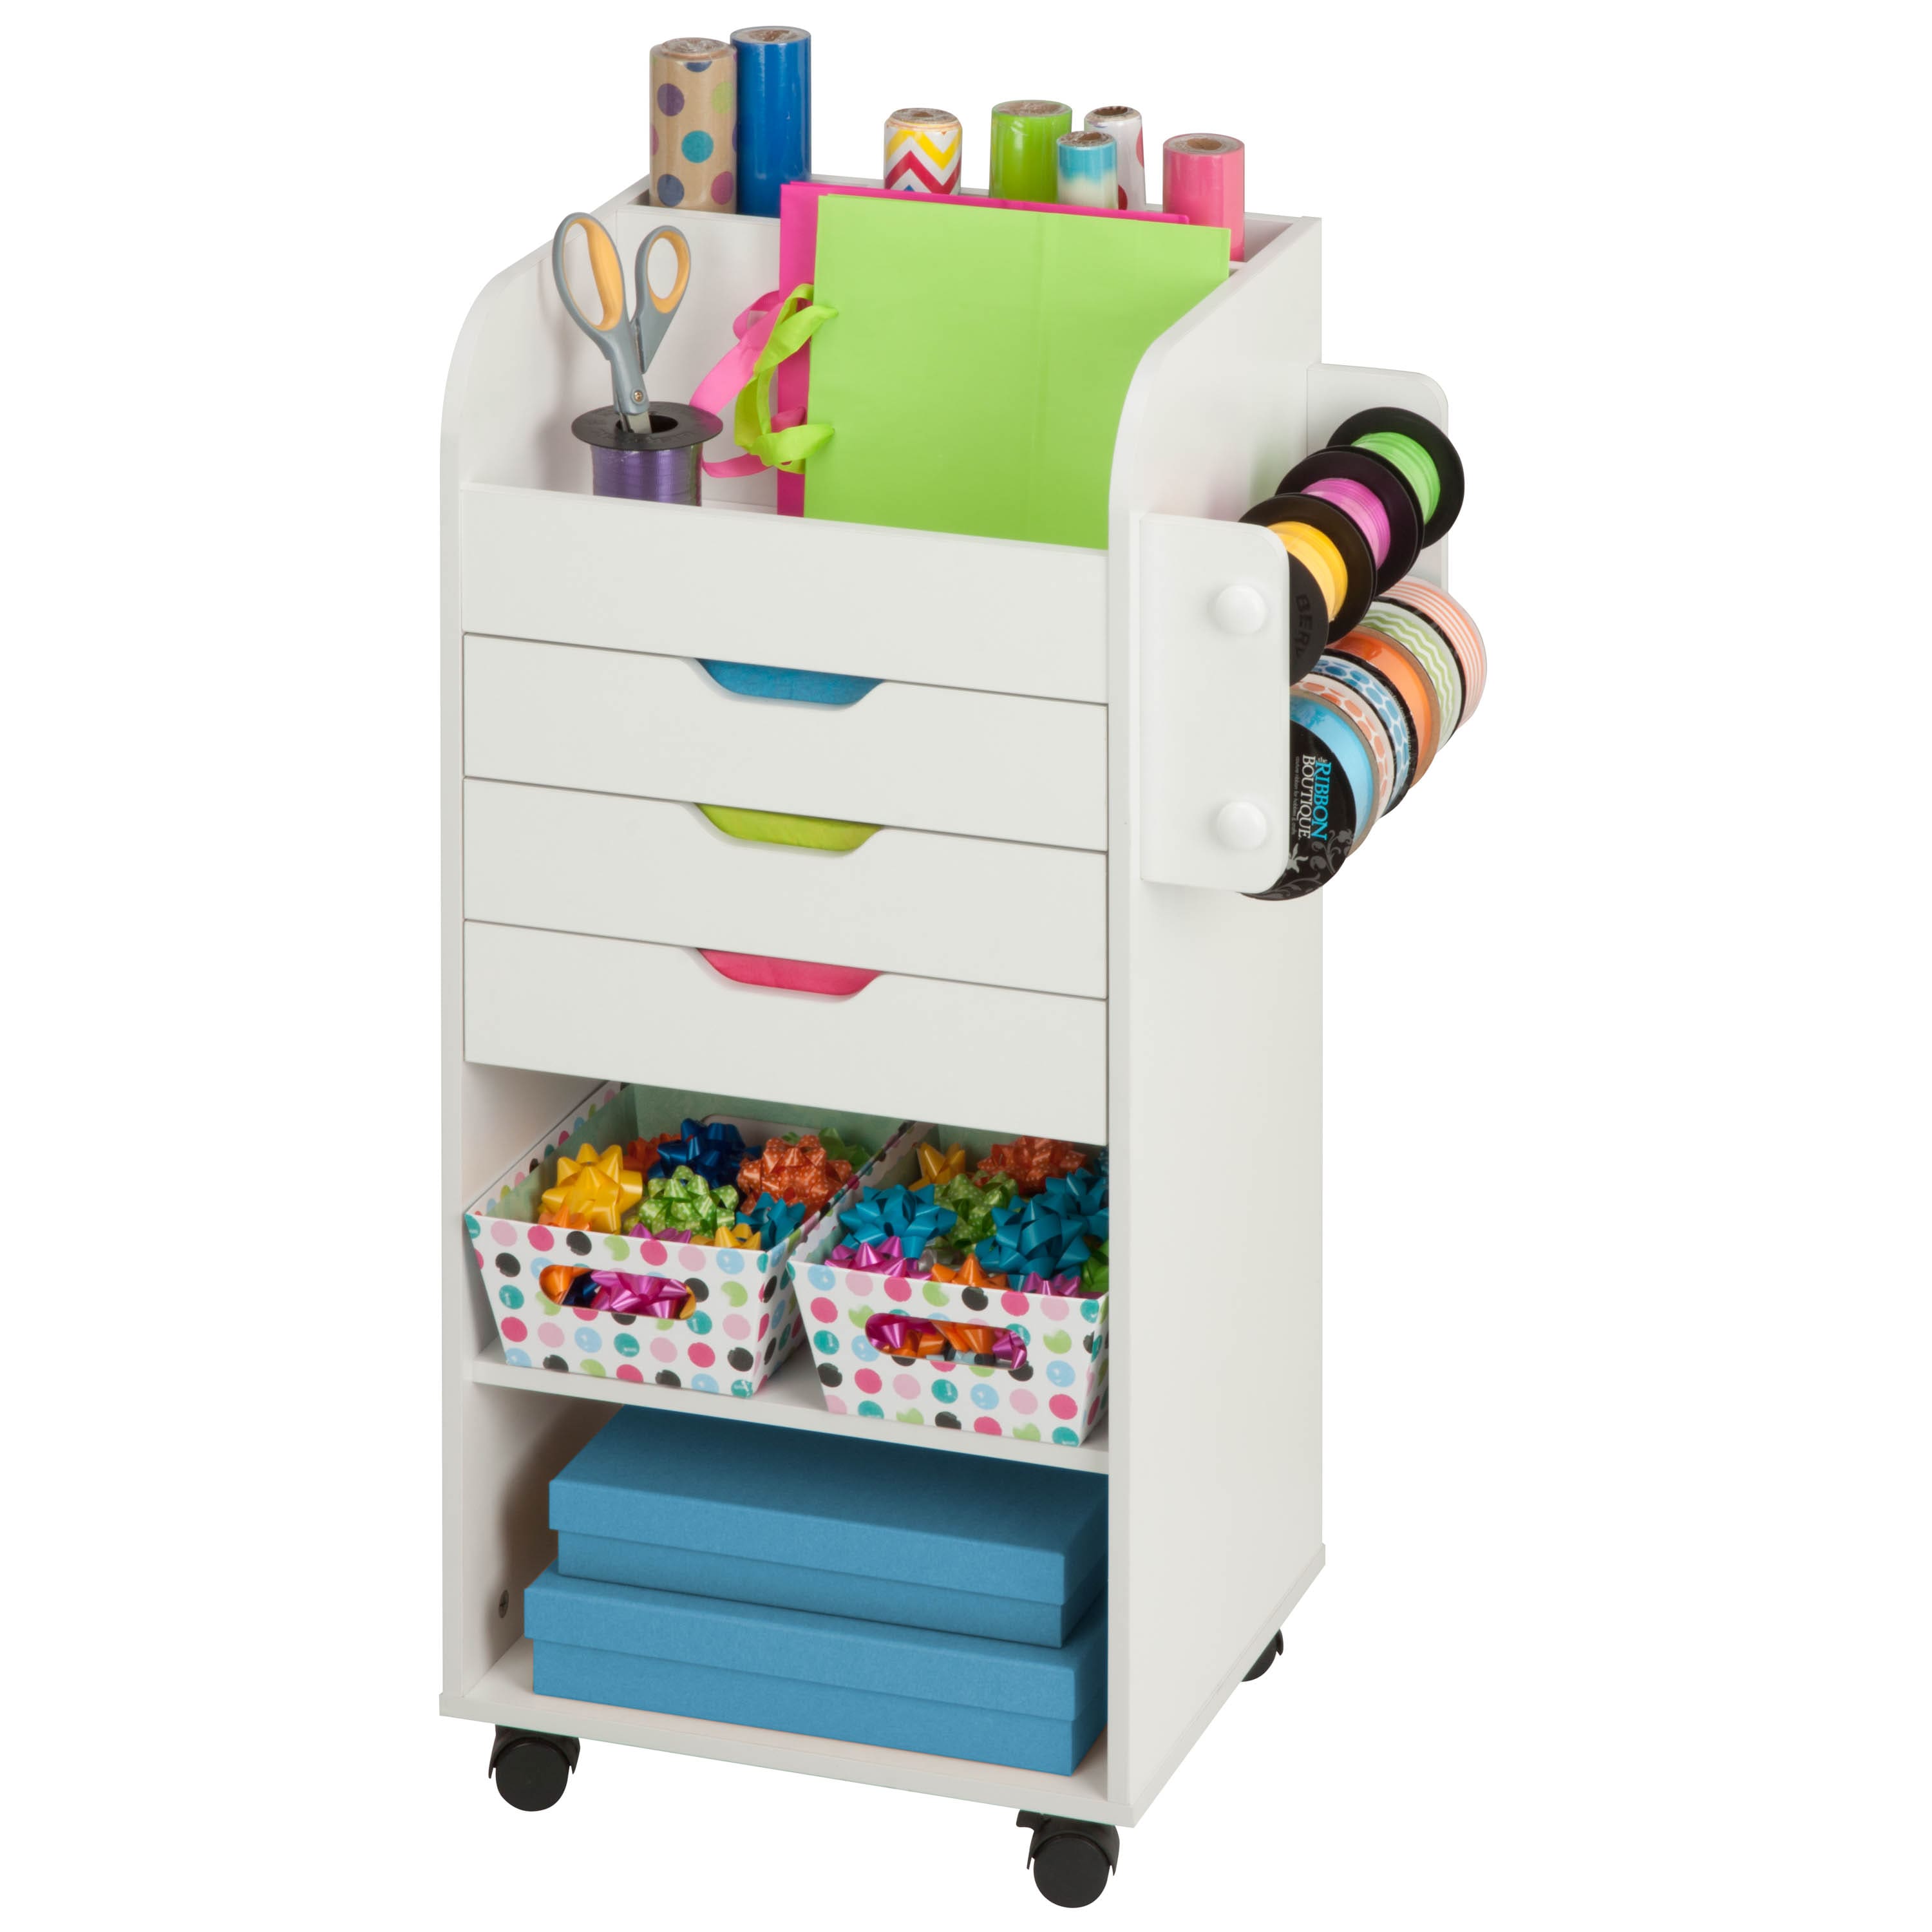 Details about   Honey Can Do Craft Storage Cart with Rollers White 